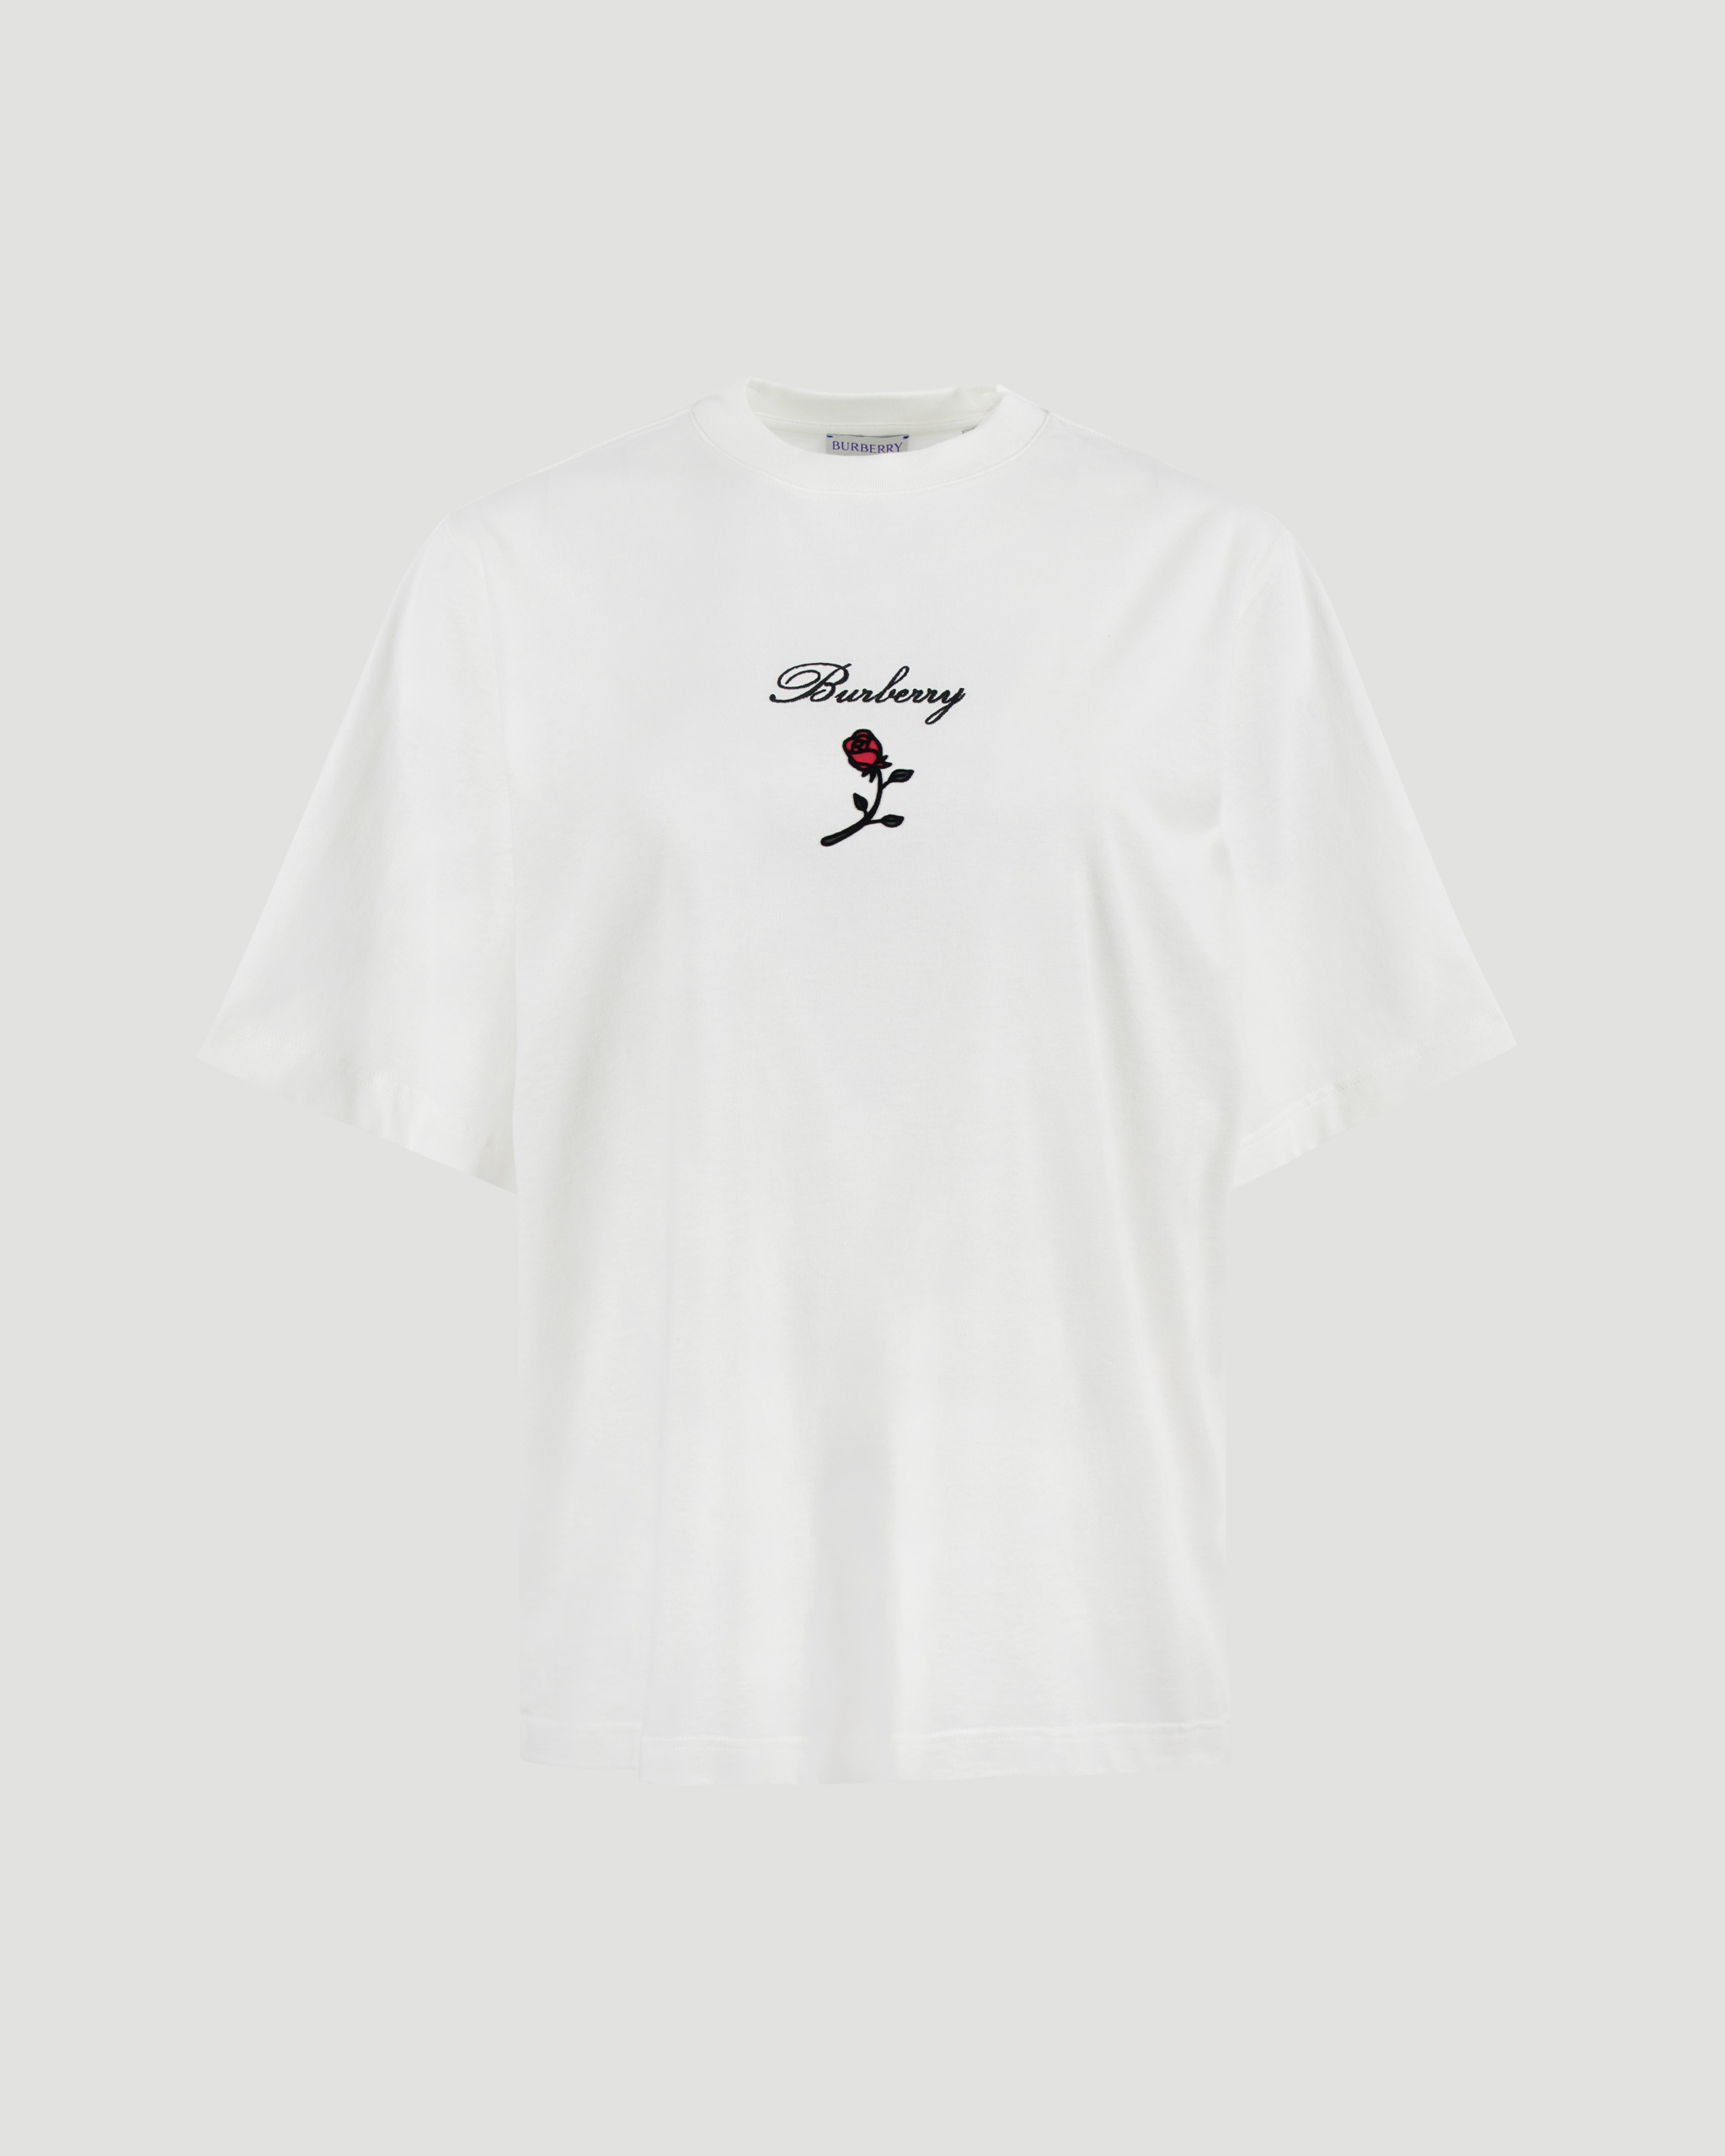 LOGO EMBROIDERY T-SHIRT IN WHITE - All-U-Re